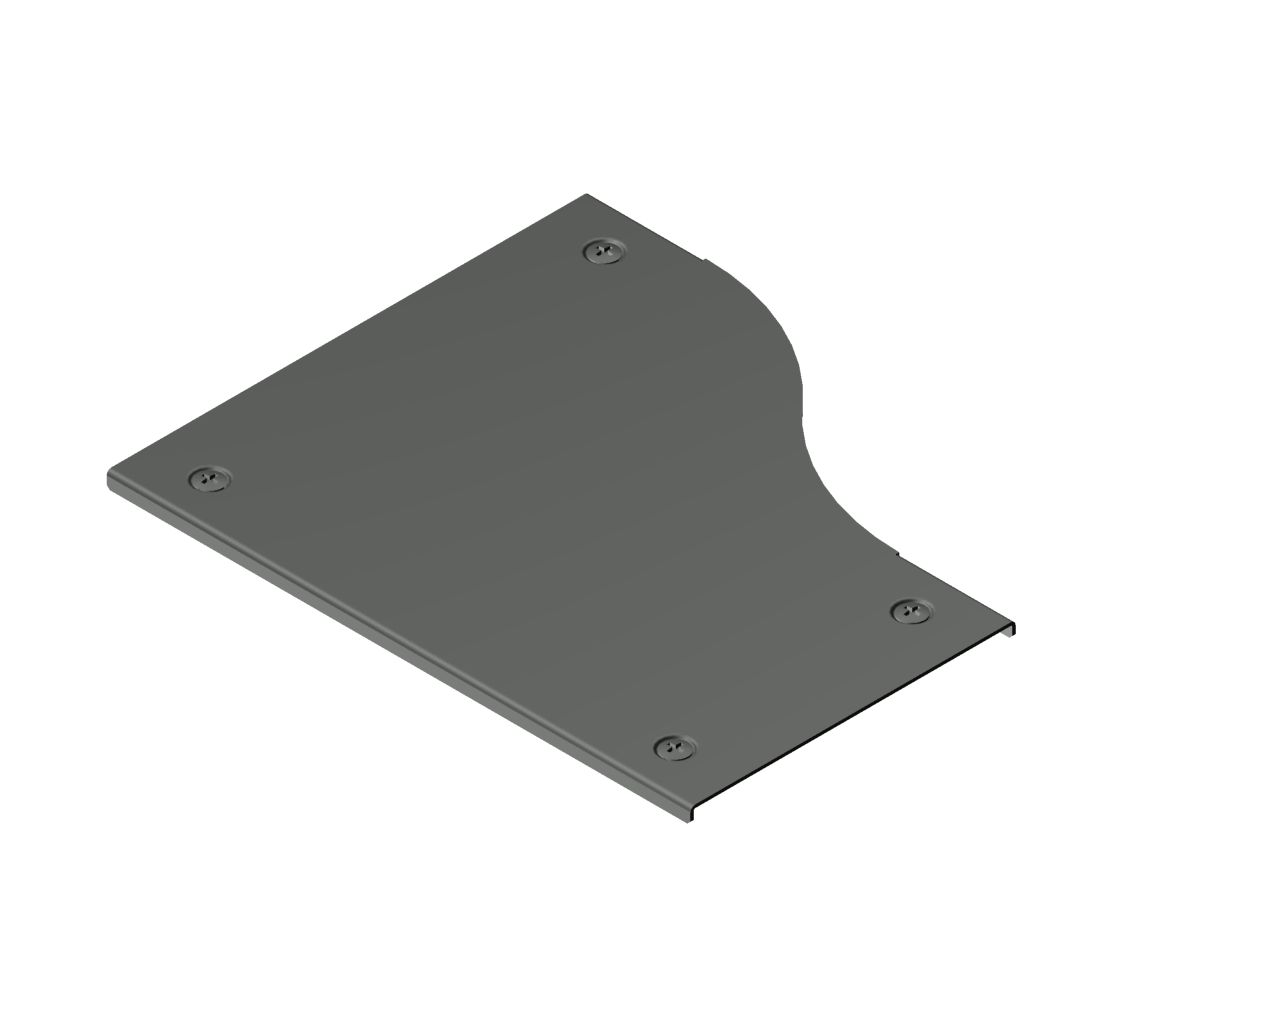 Heavy tray reduction right cover with lock PRKCPZM